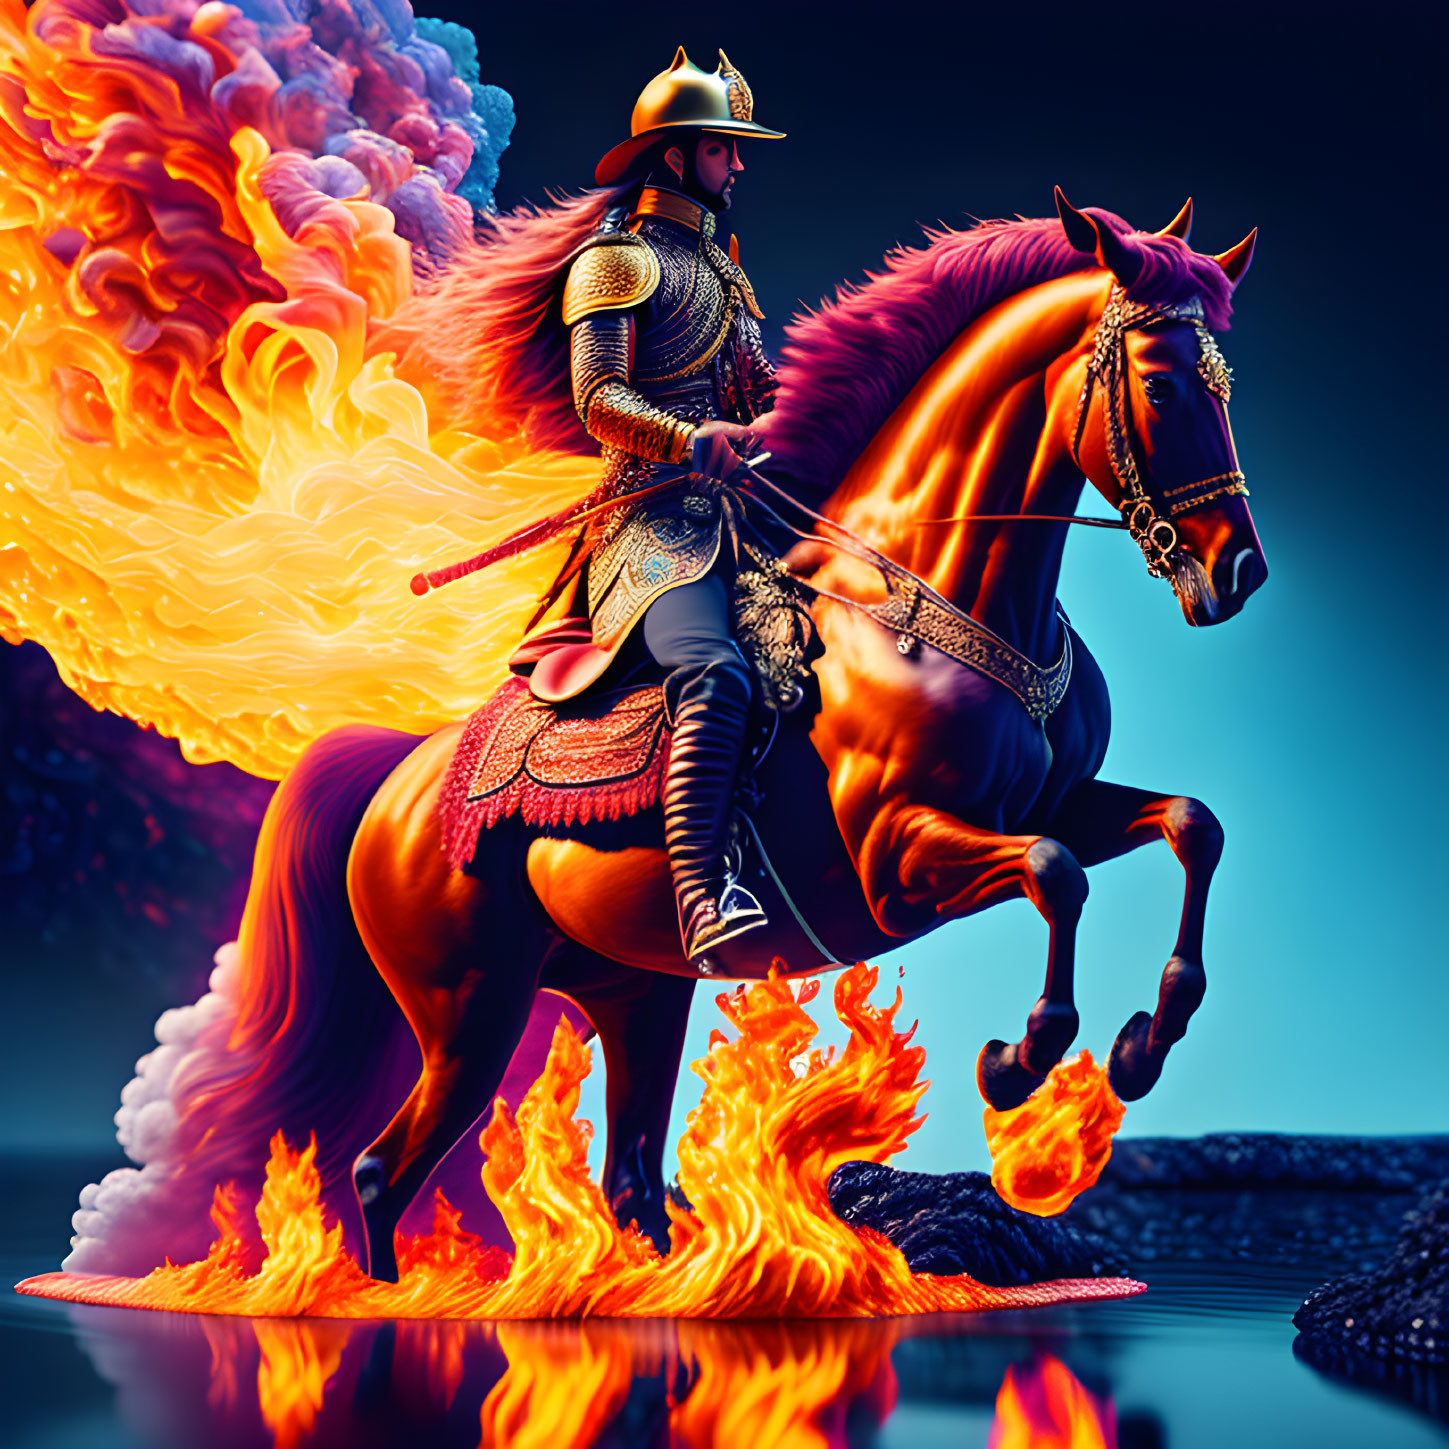 Knight on horseback through fiery scene with vibrant colors